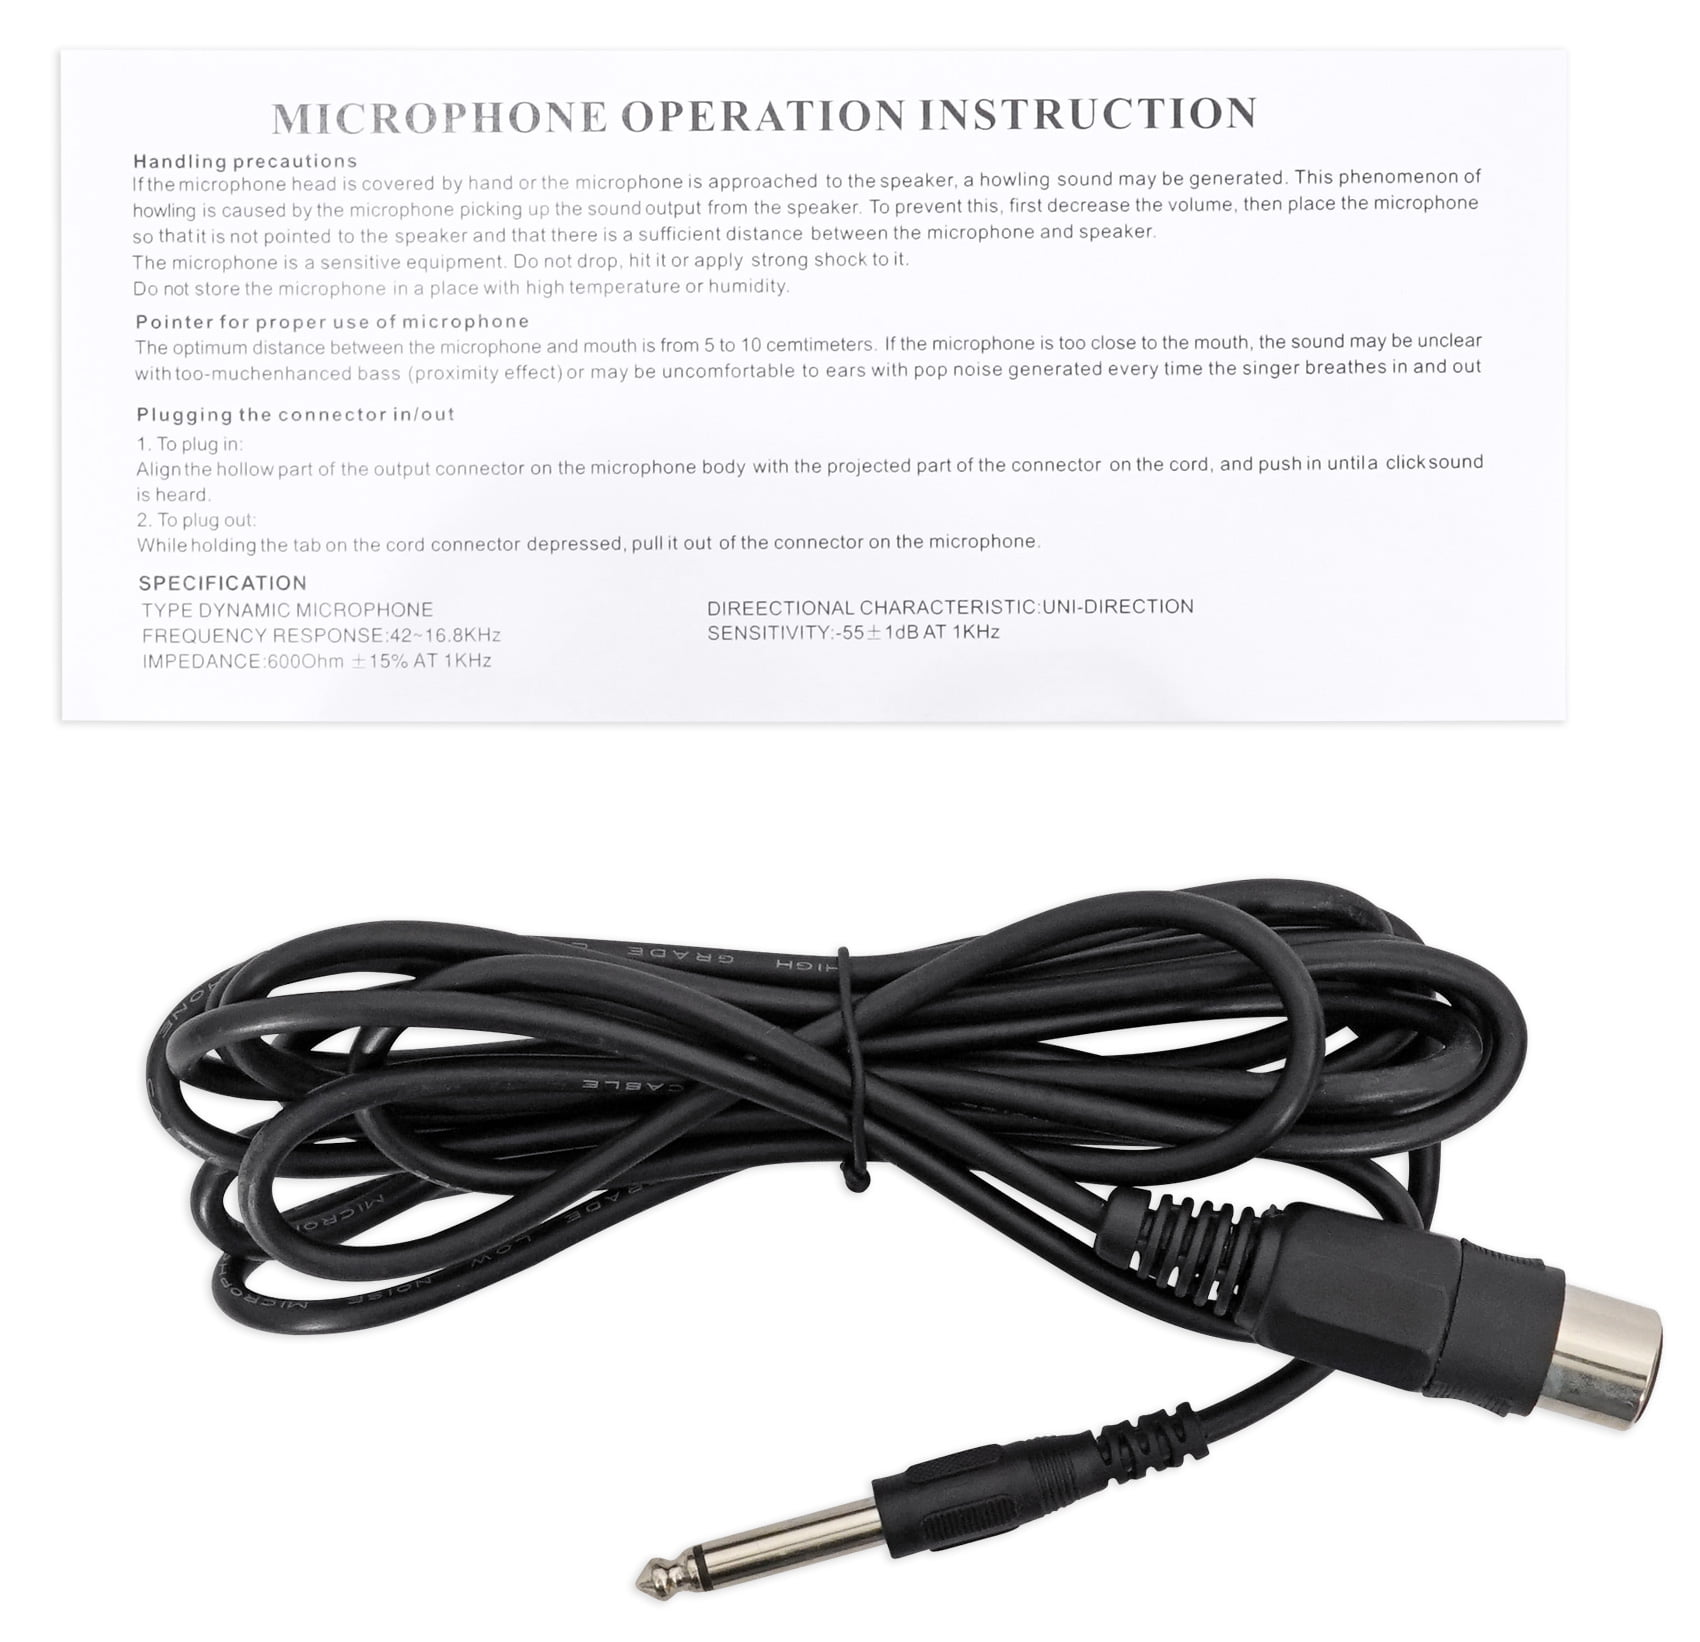 XLR to 1/4 Portable Technical Pro Wired Microphone with Digital Processing Karaoke DJ Wired Microphone Wired Mic Included Renewed Karaoke 10 Ft Cable Cables Included Steel Construction 